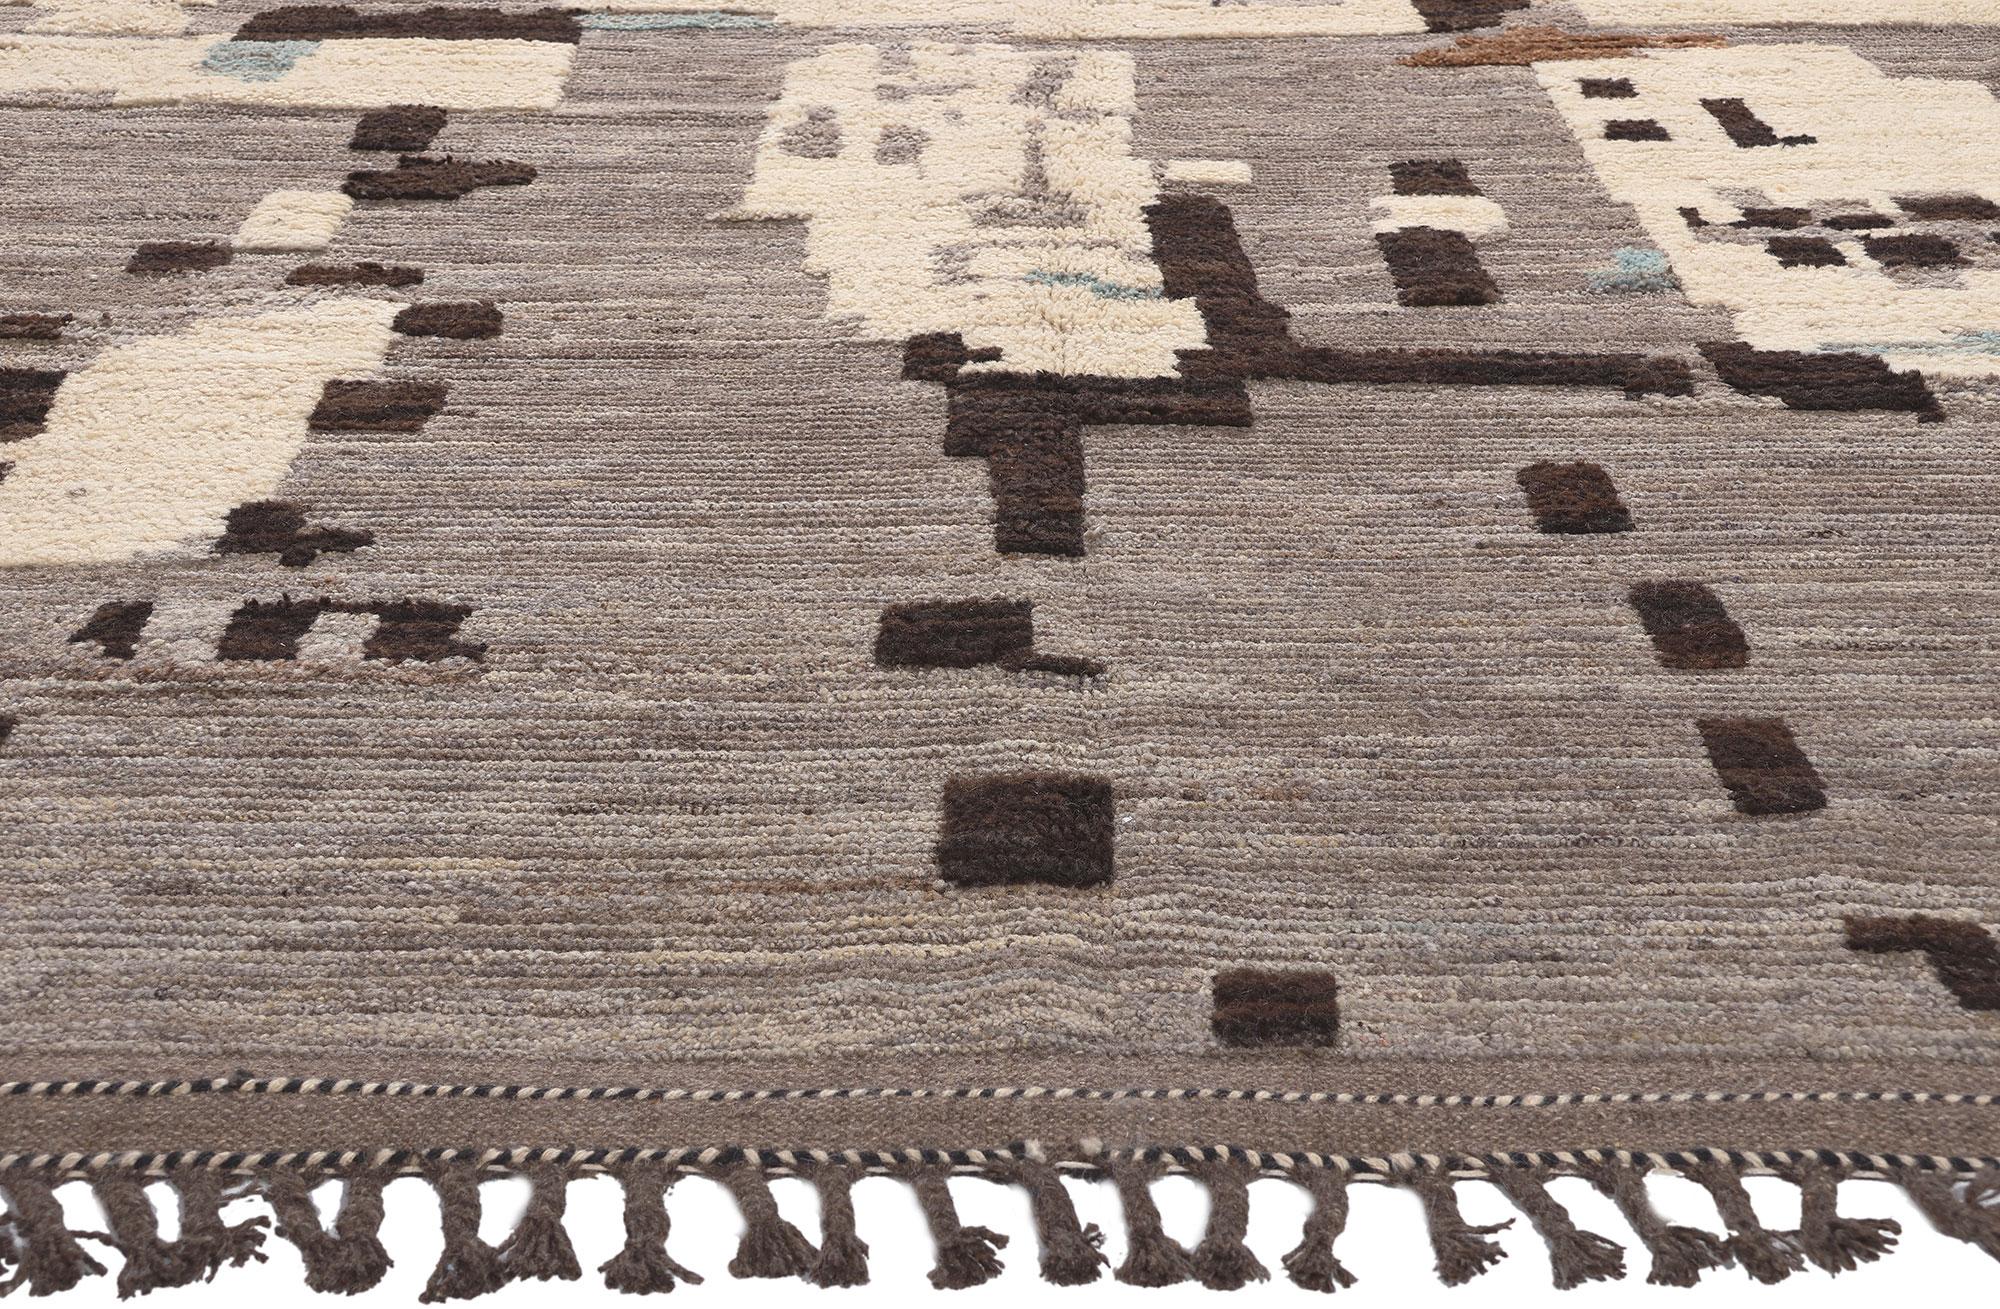 Organic Modern Earth-Tone Modern Moroccan High-Low Rug Inspired by Nature, Biophilic Design For Sale